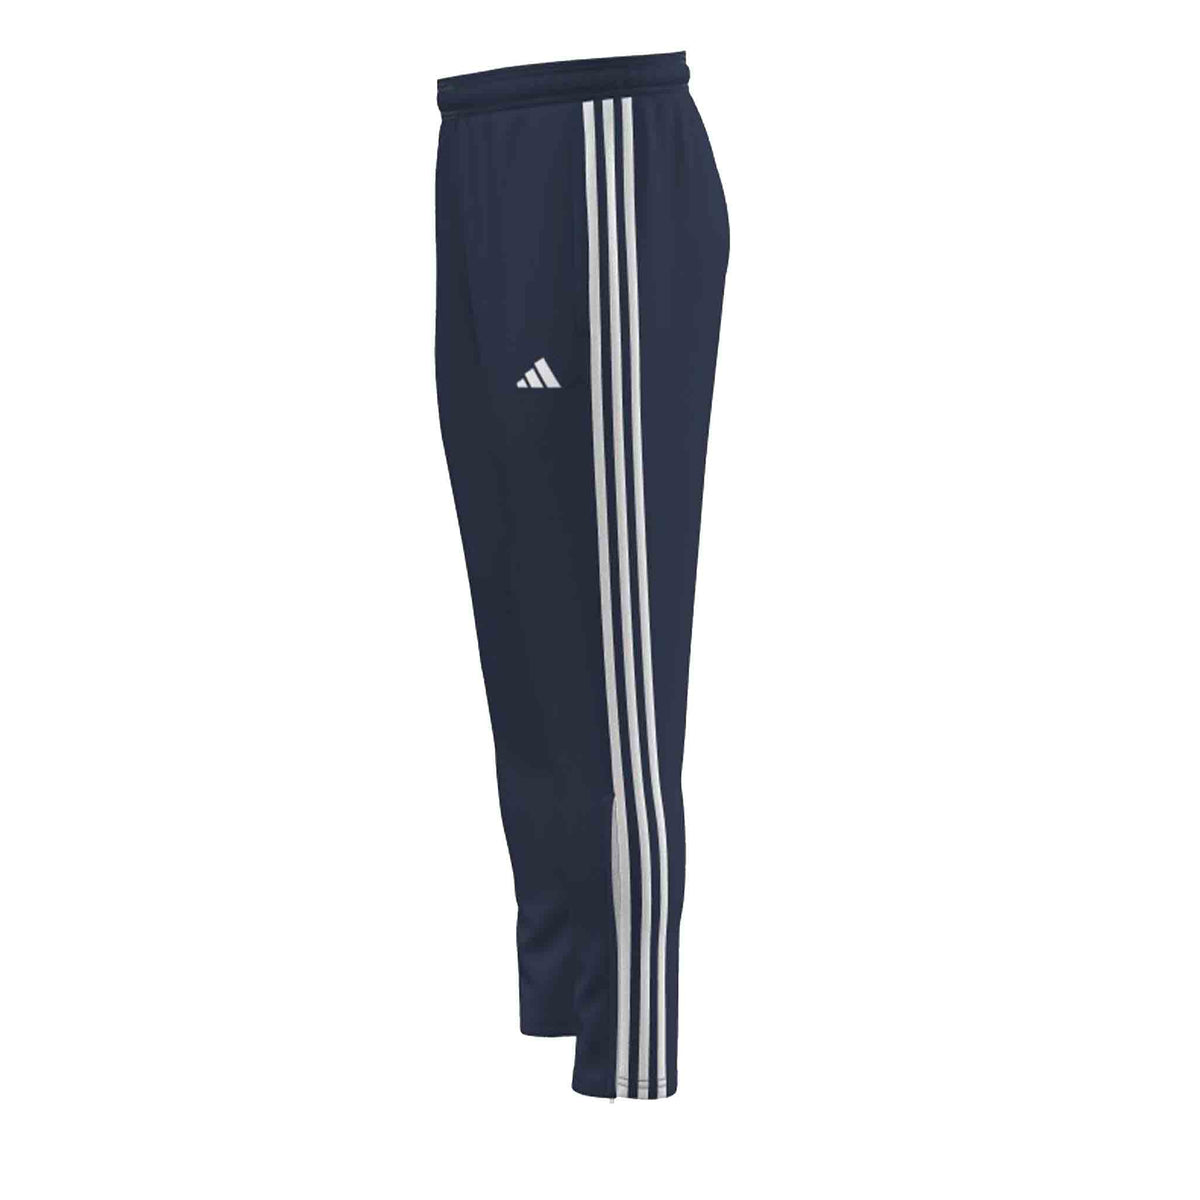 Hampstead and Westminster HC Men's Training Pants